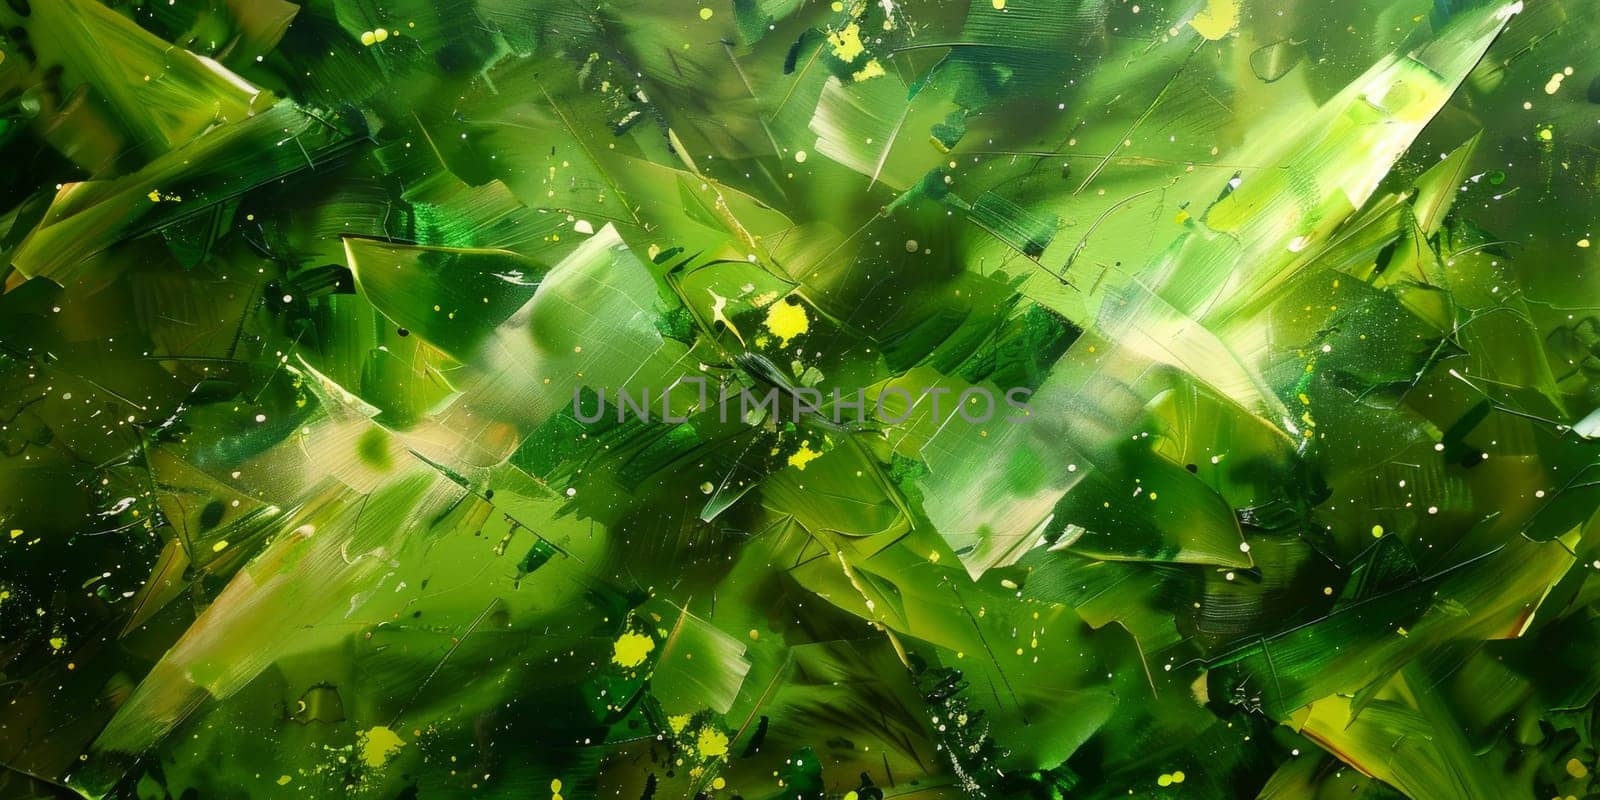 Green leaves in abstract pattern creating lush green background